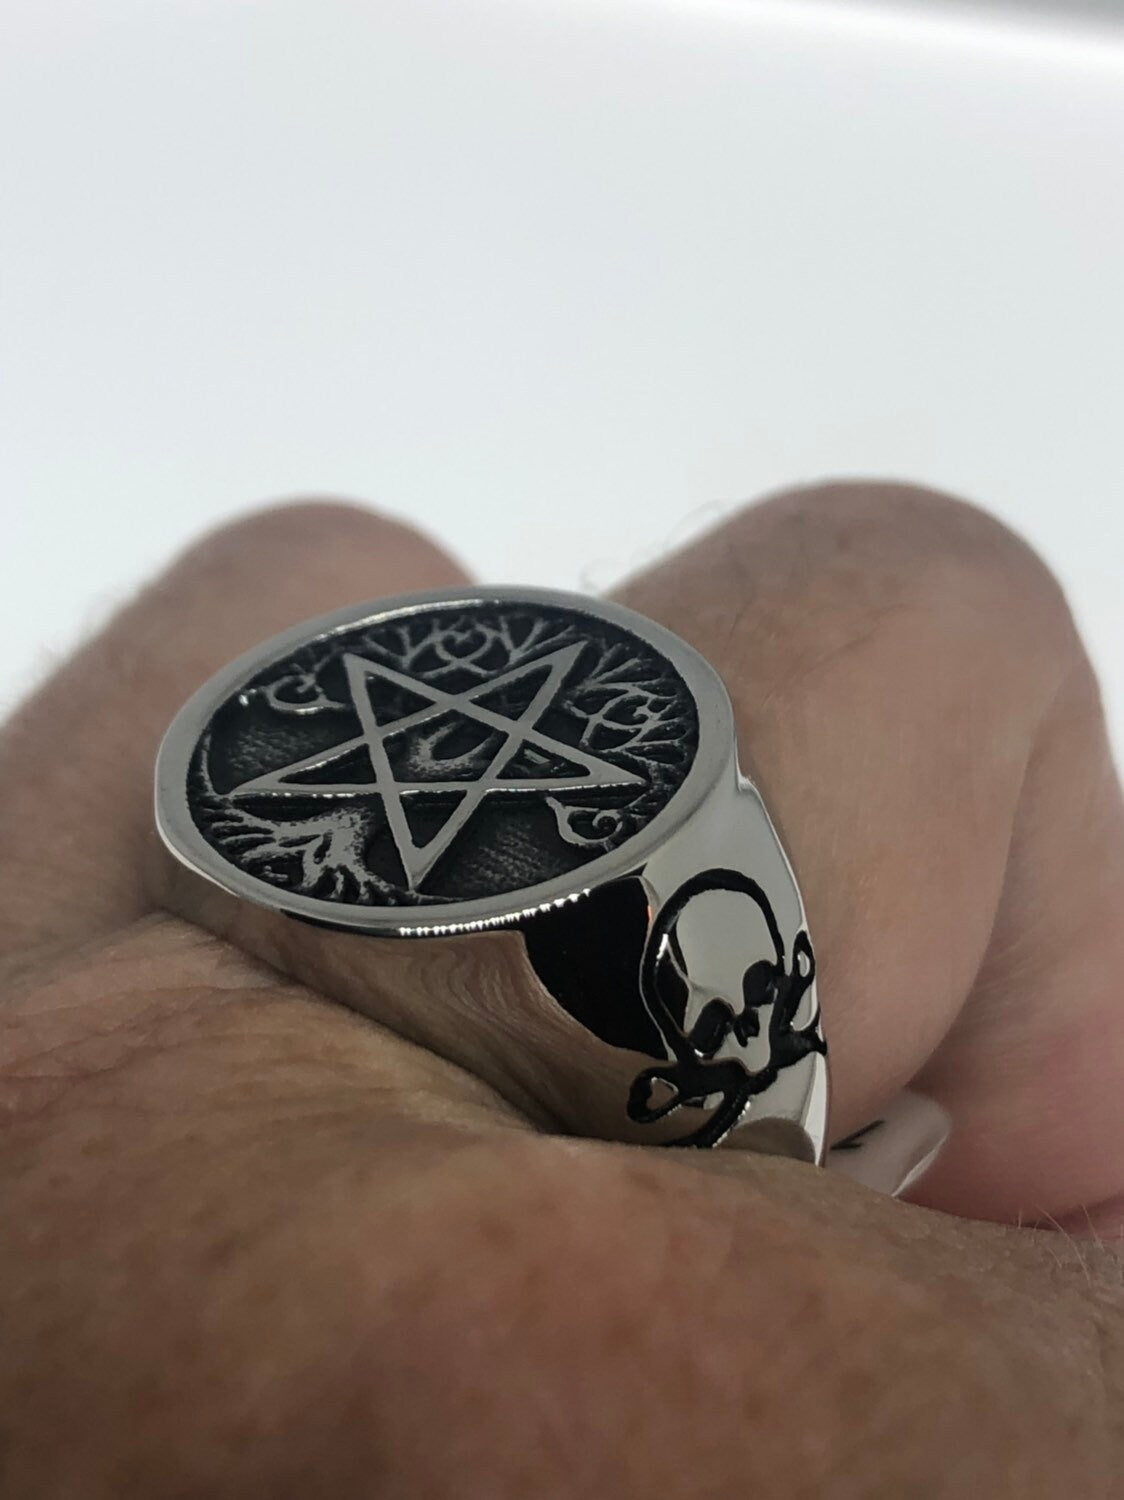 Vintage Gothic Silver Stainless Steel Pentacle Star Mens Ring